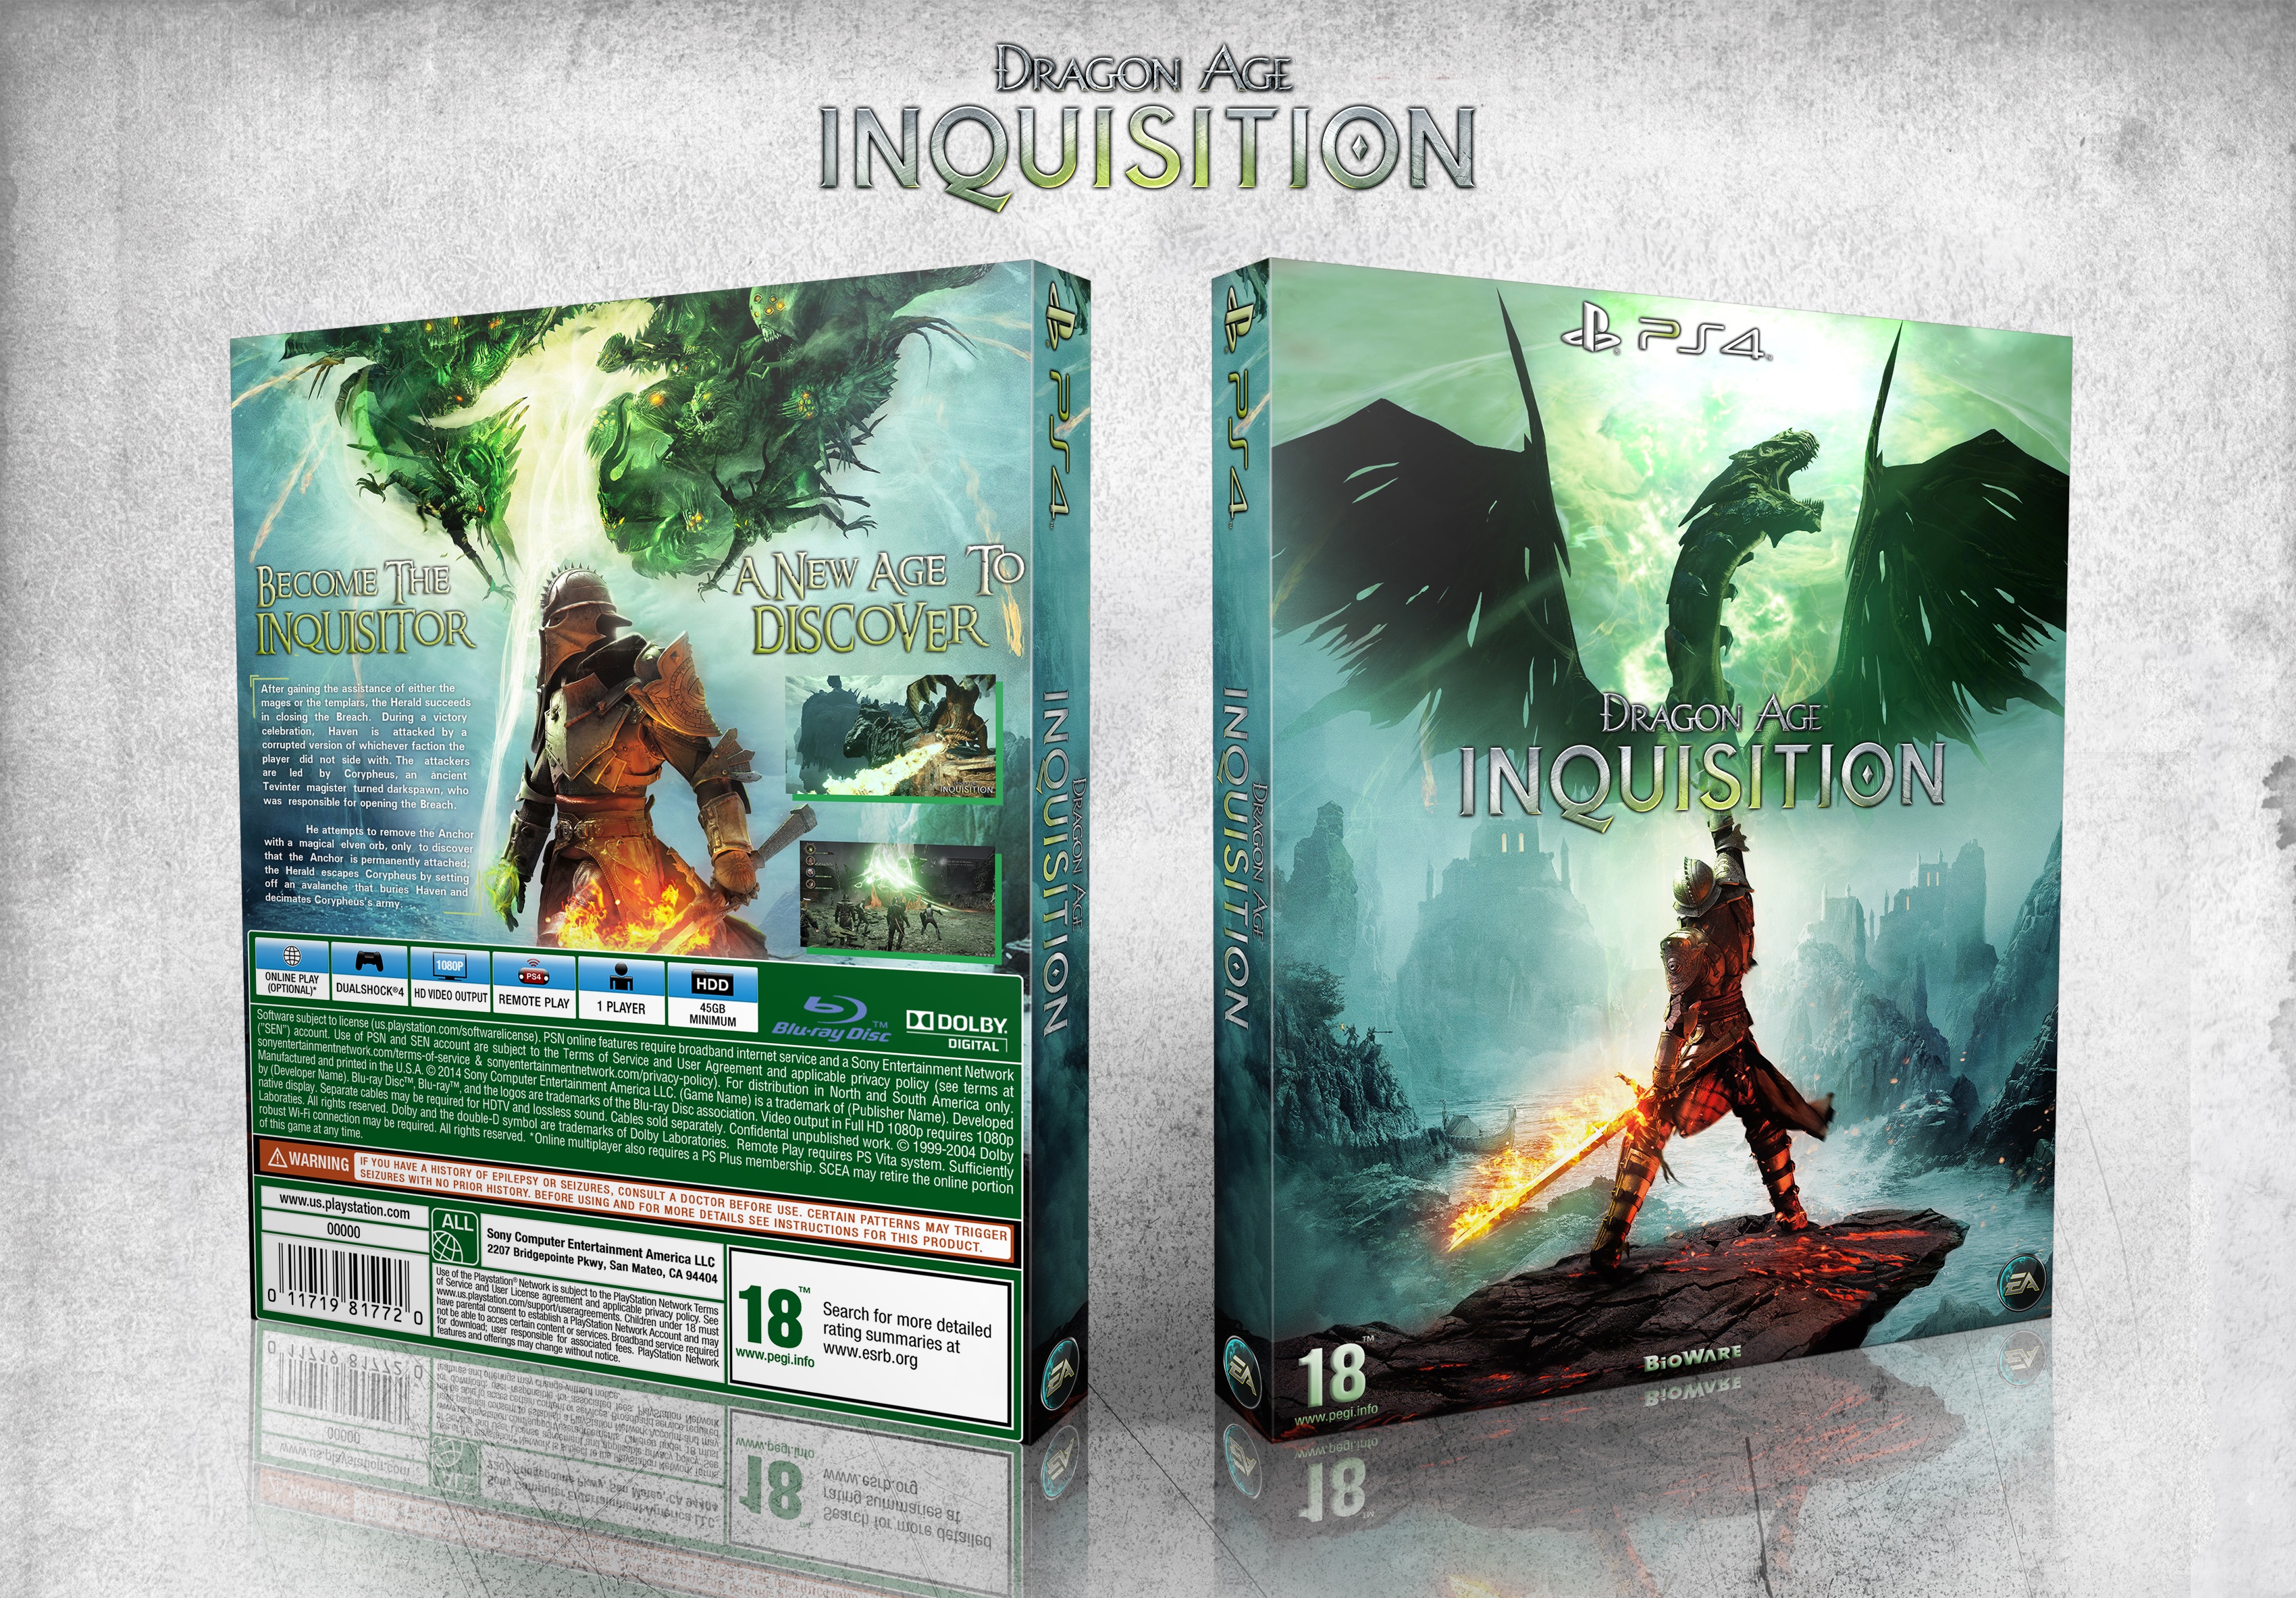 Viewing full size Dragon Age: Inquisition box cover